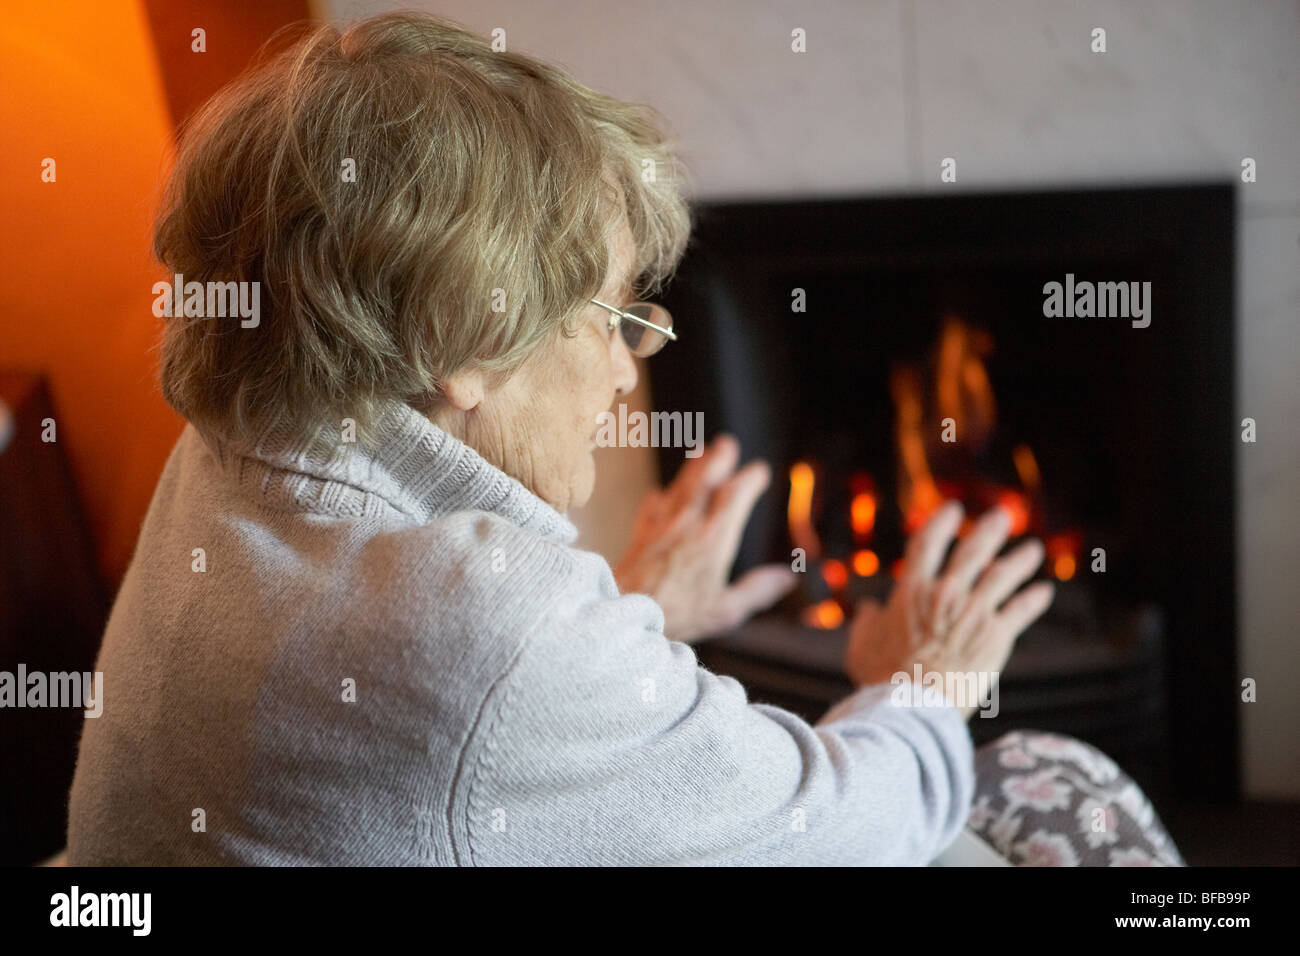 Senior Woman Warming Hands By Fire At Home Stock Photo